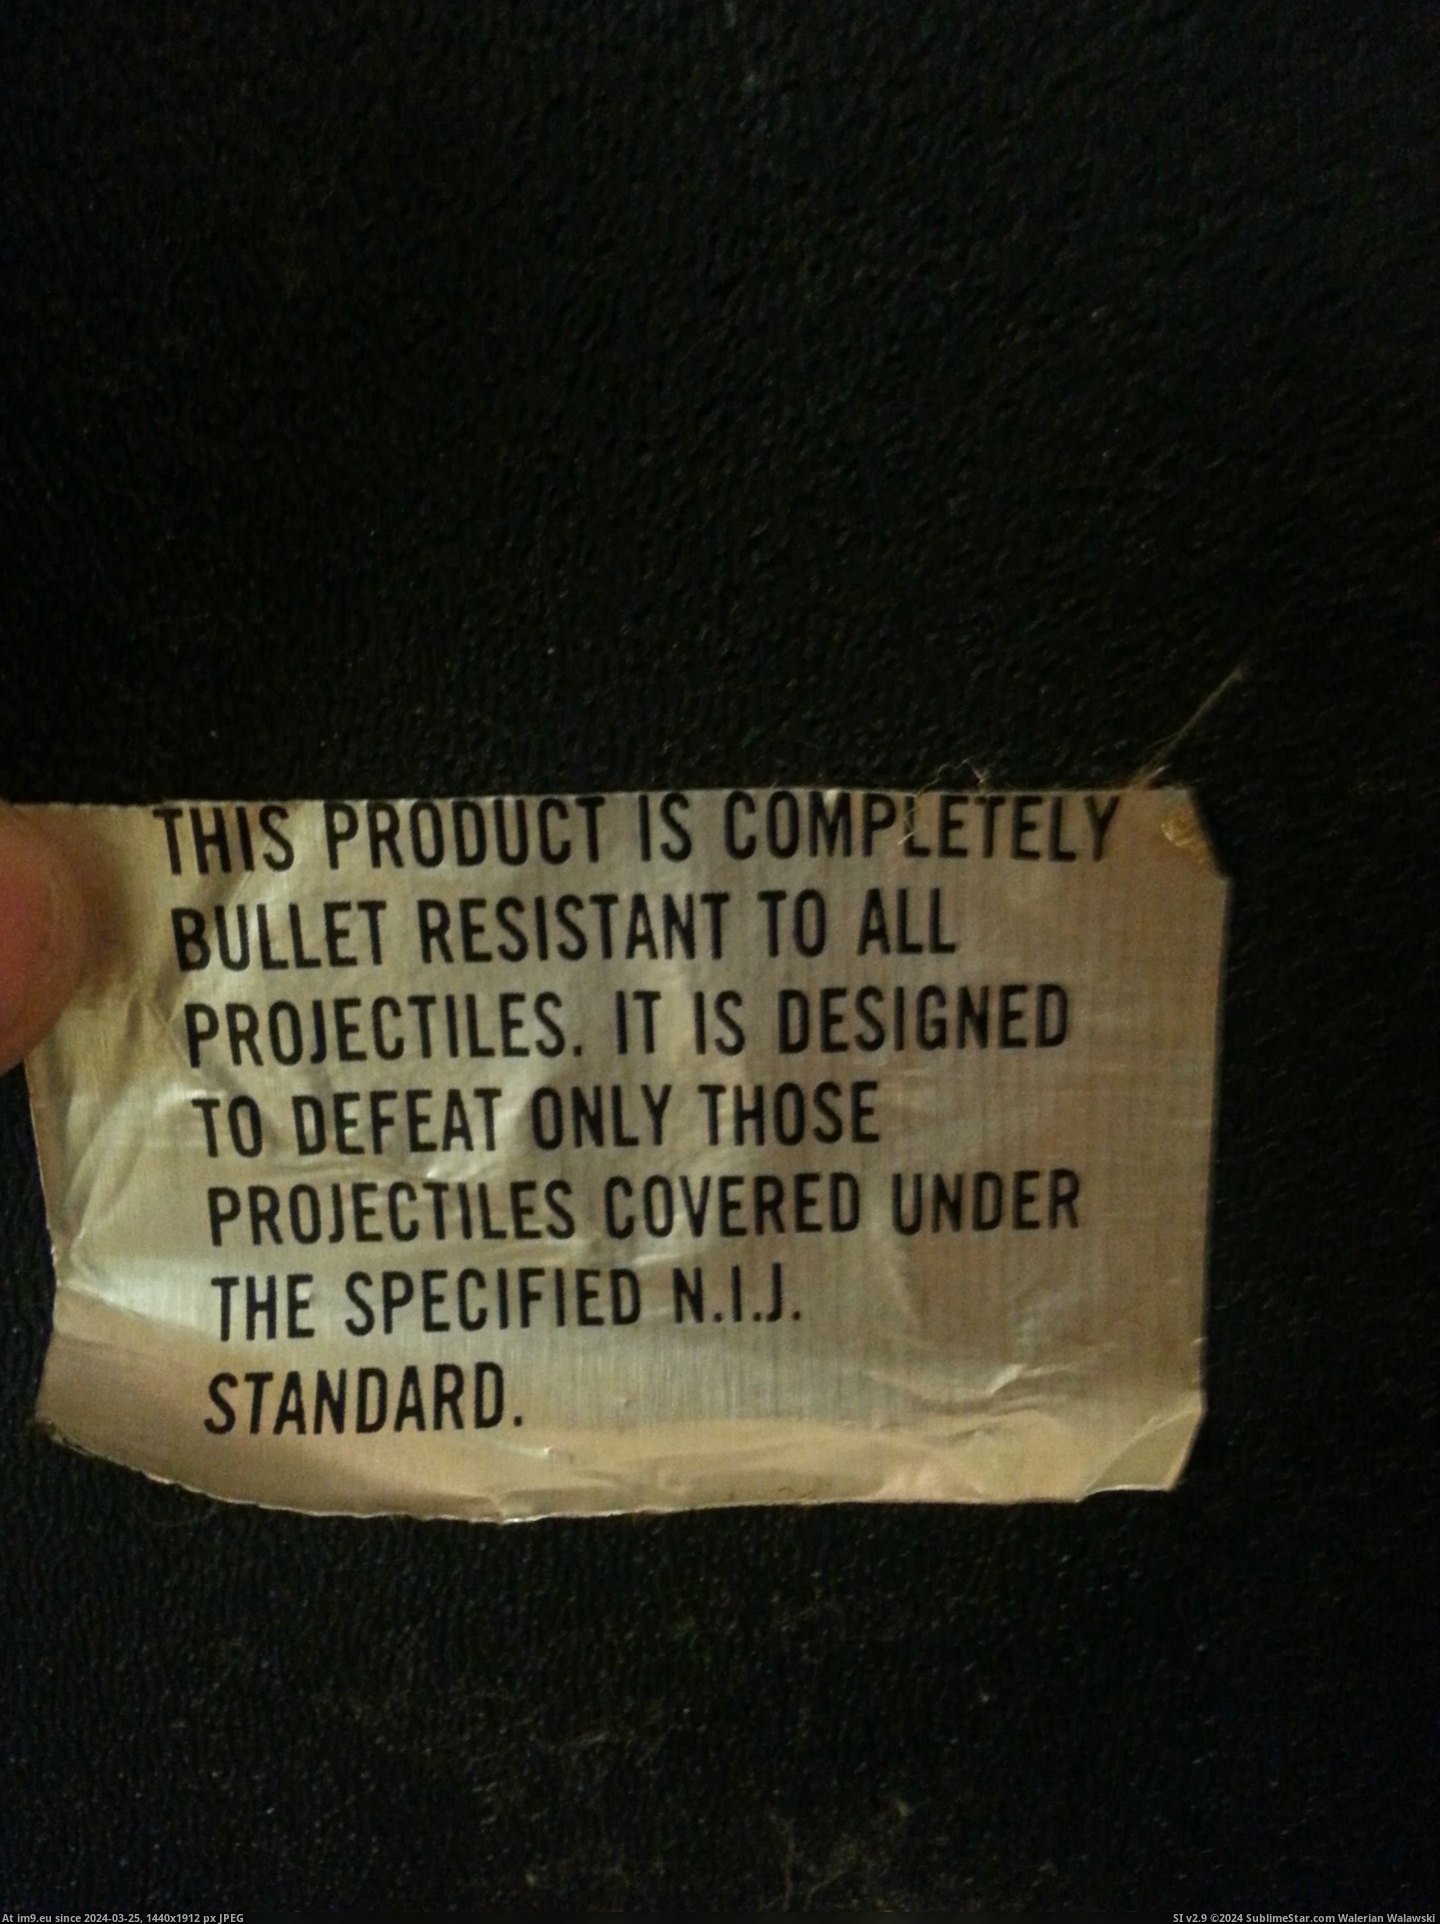 #Awesome #Find #Give #Riot #Shield #Resistant #Completely #Bullet #Goodwill [Pics] My awesome $40 Goodwill find: 'Completely bullet resistant' riot shield. Who would give this away? 3 Pic. (Bild von album My r/PICS favs))